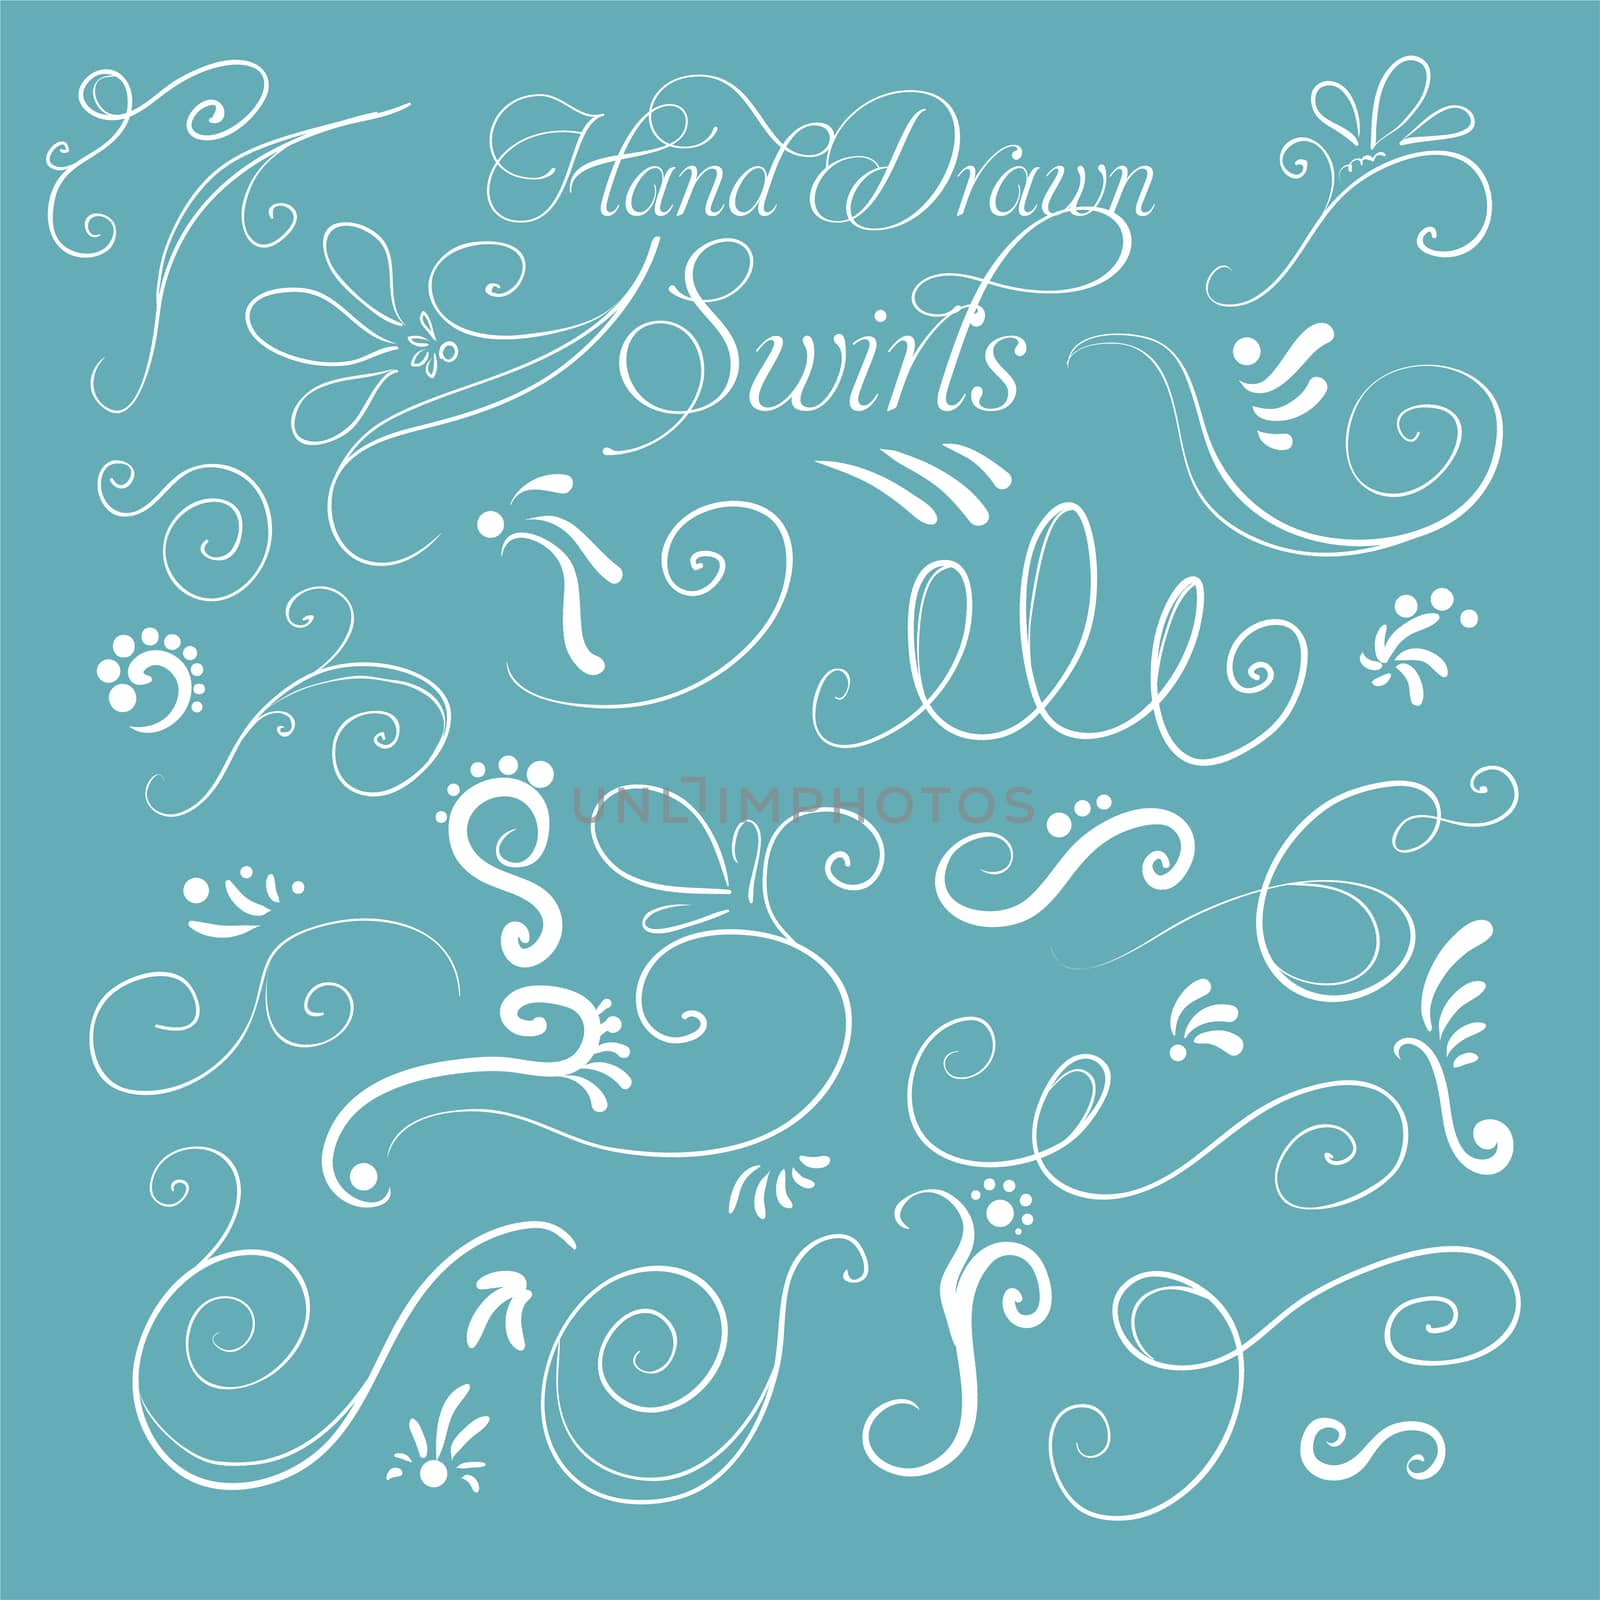 Set of decorative swirls hand-drawn on a turquoise background for your design. illustration